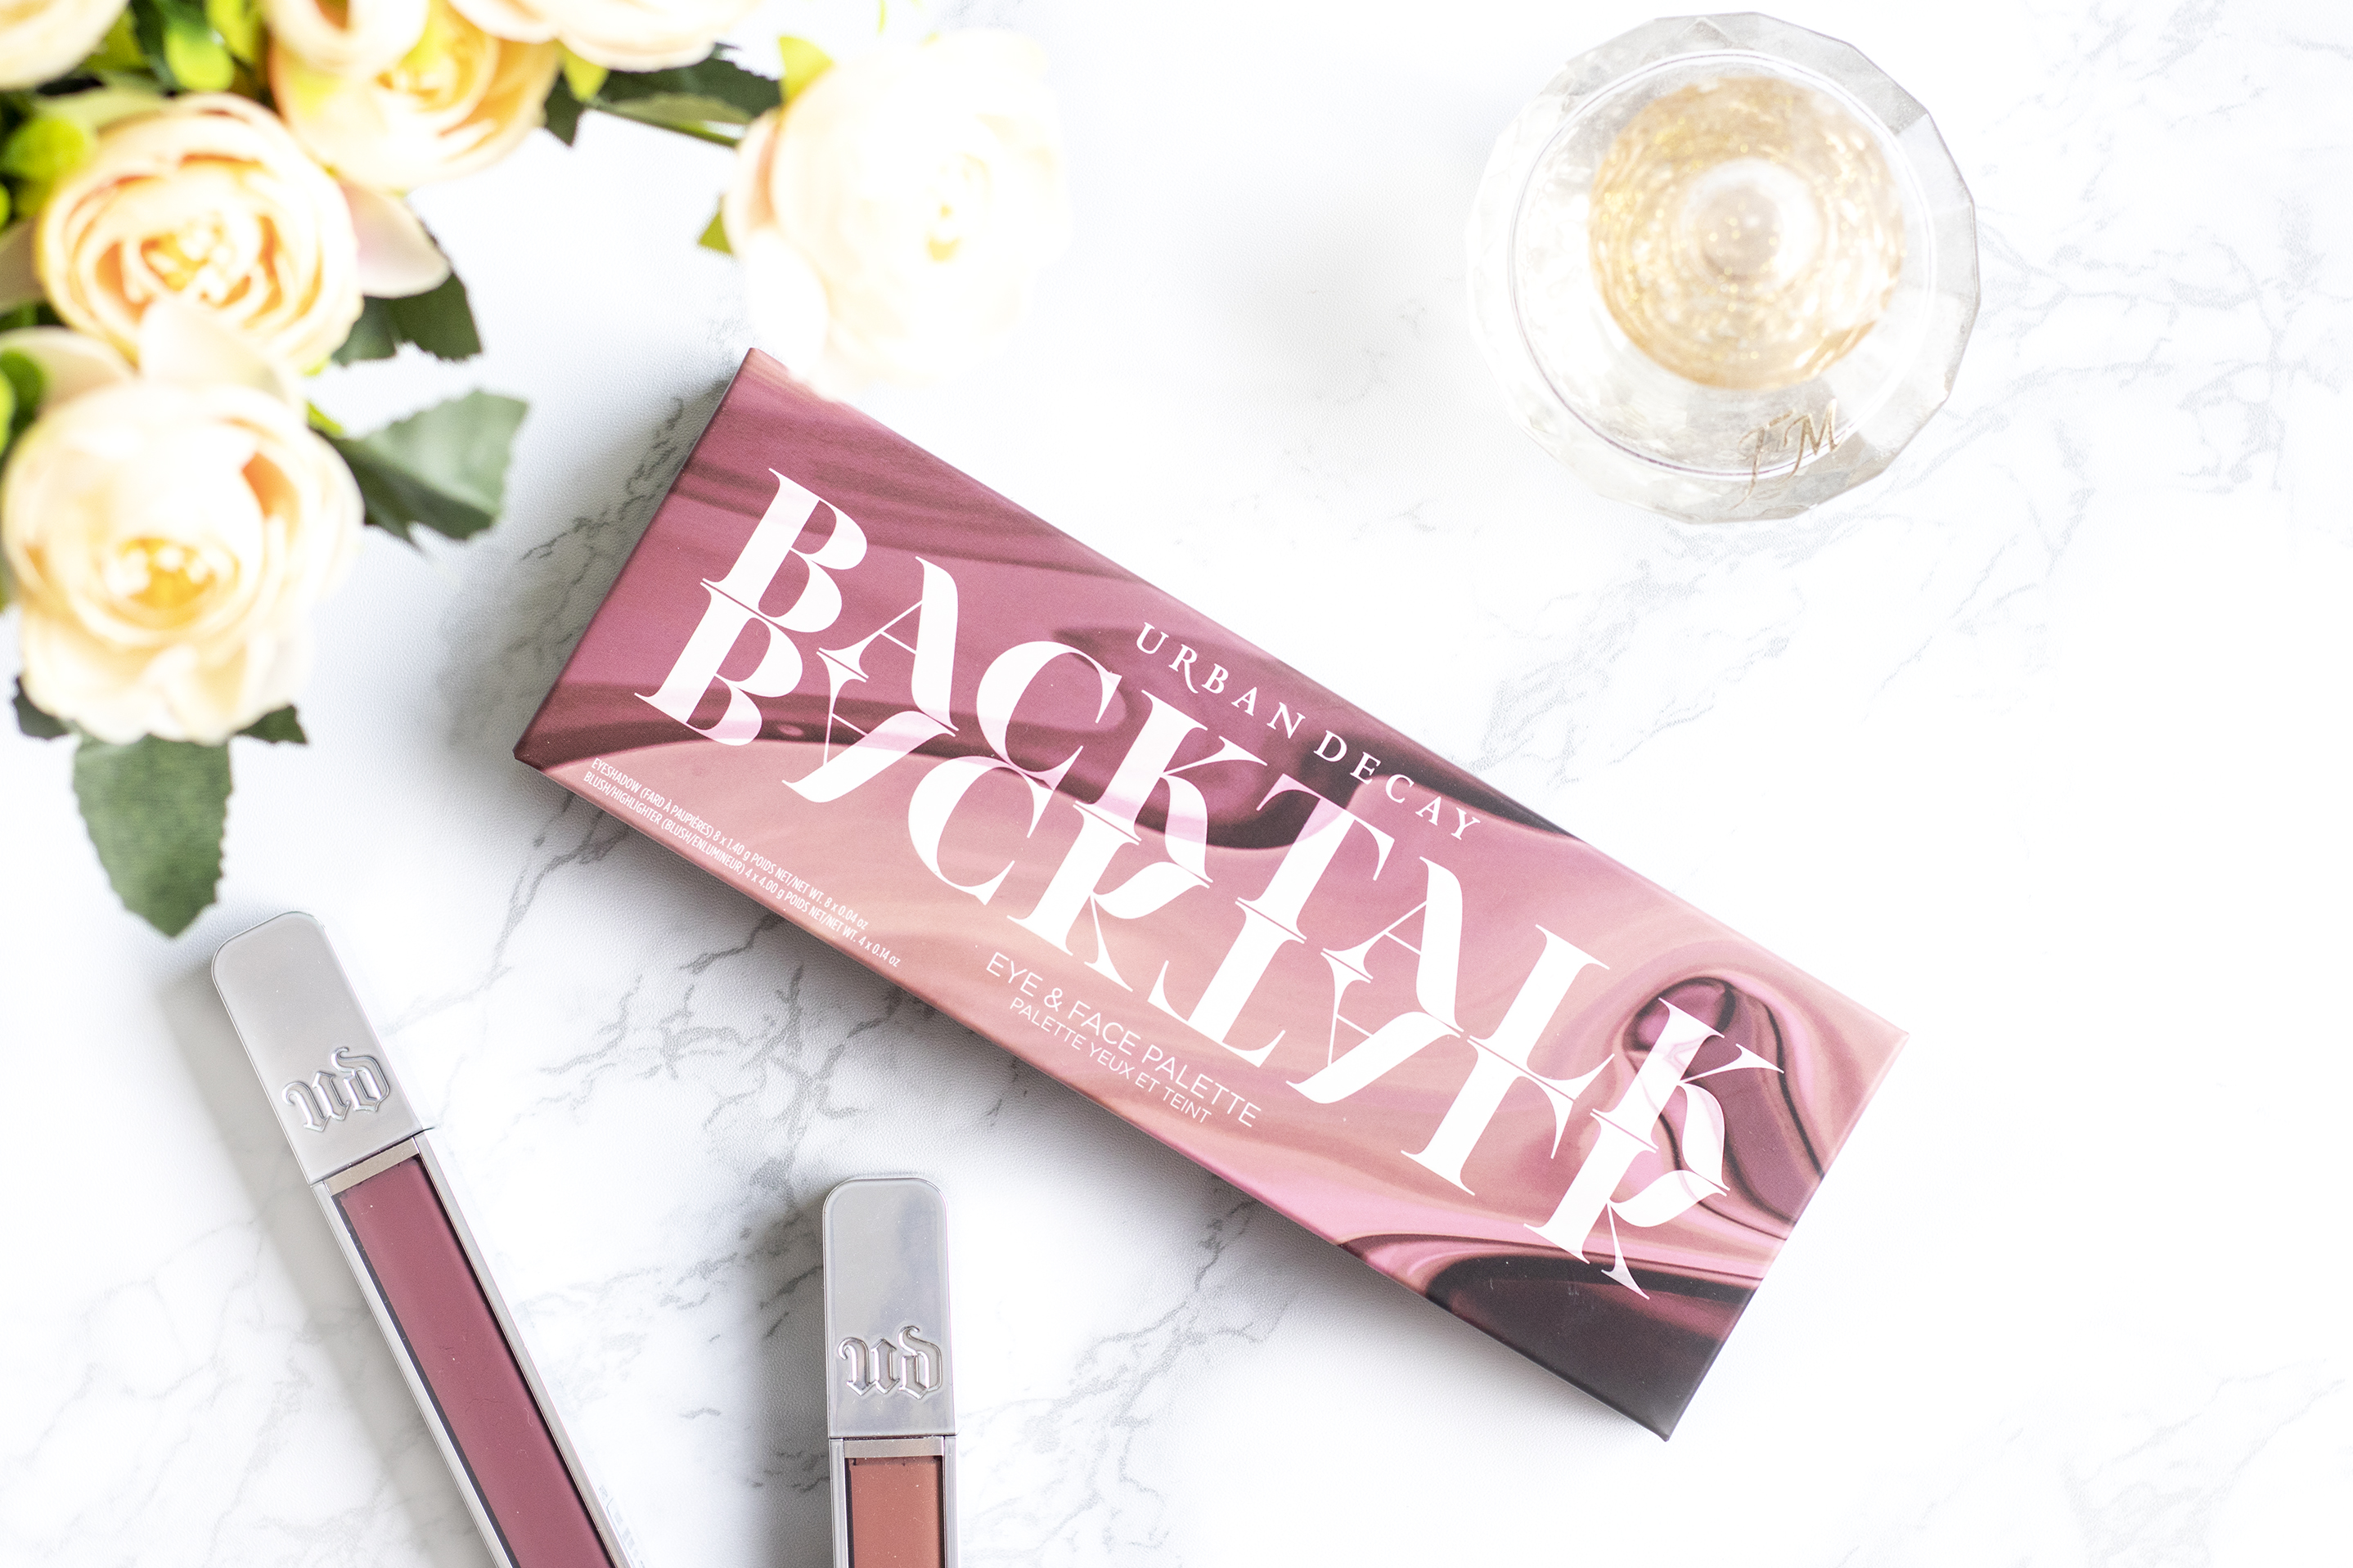 backtalk palette urban decay review